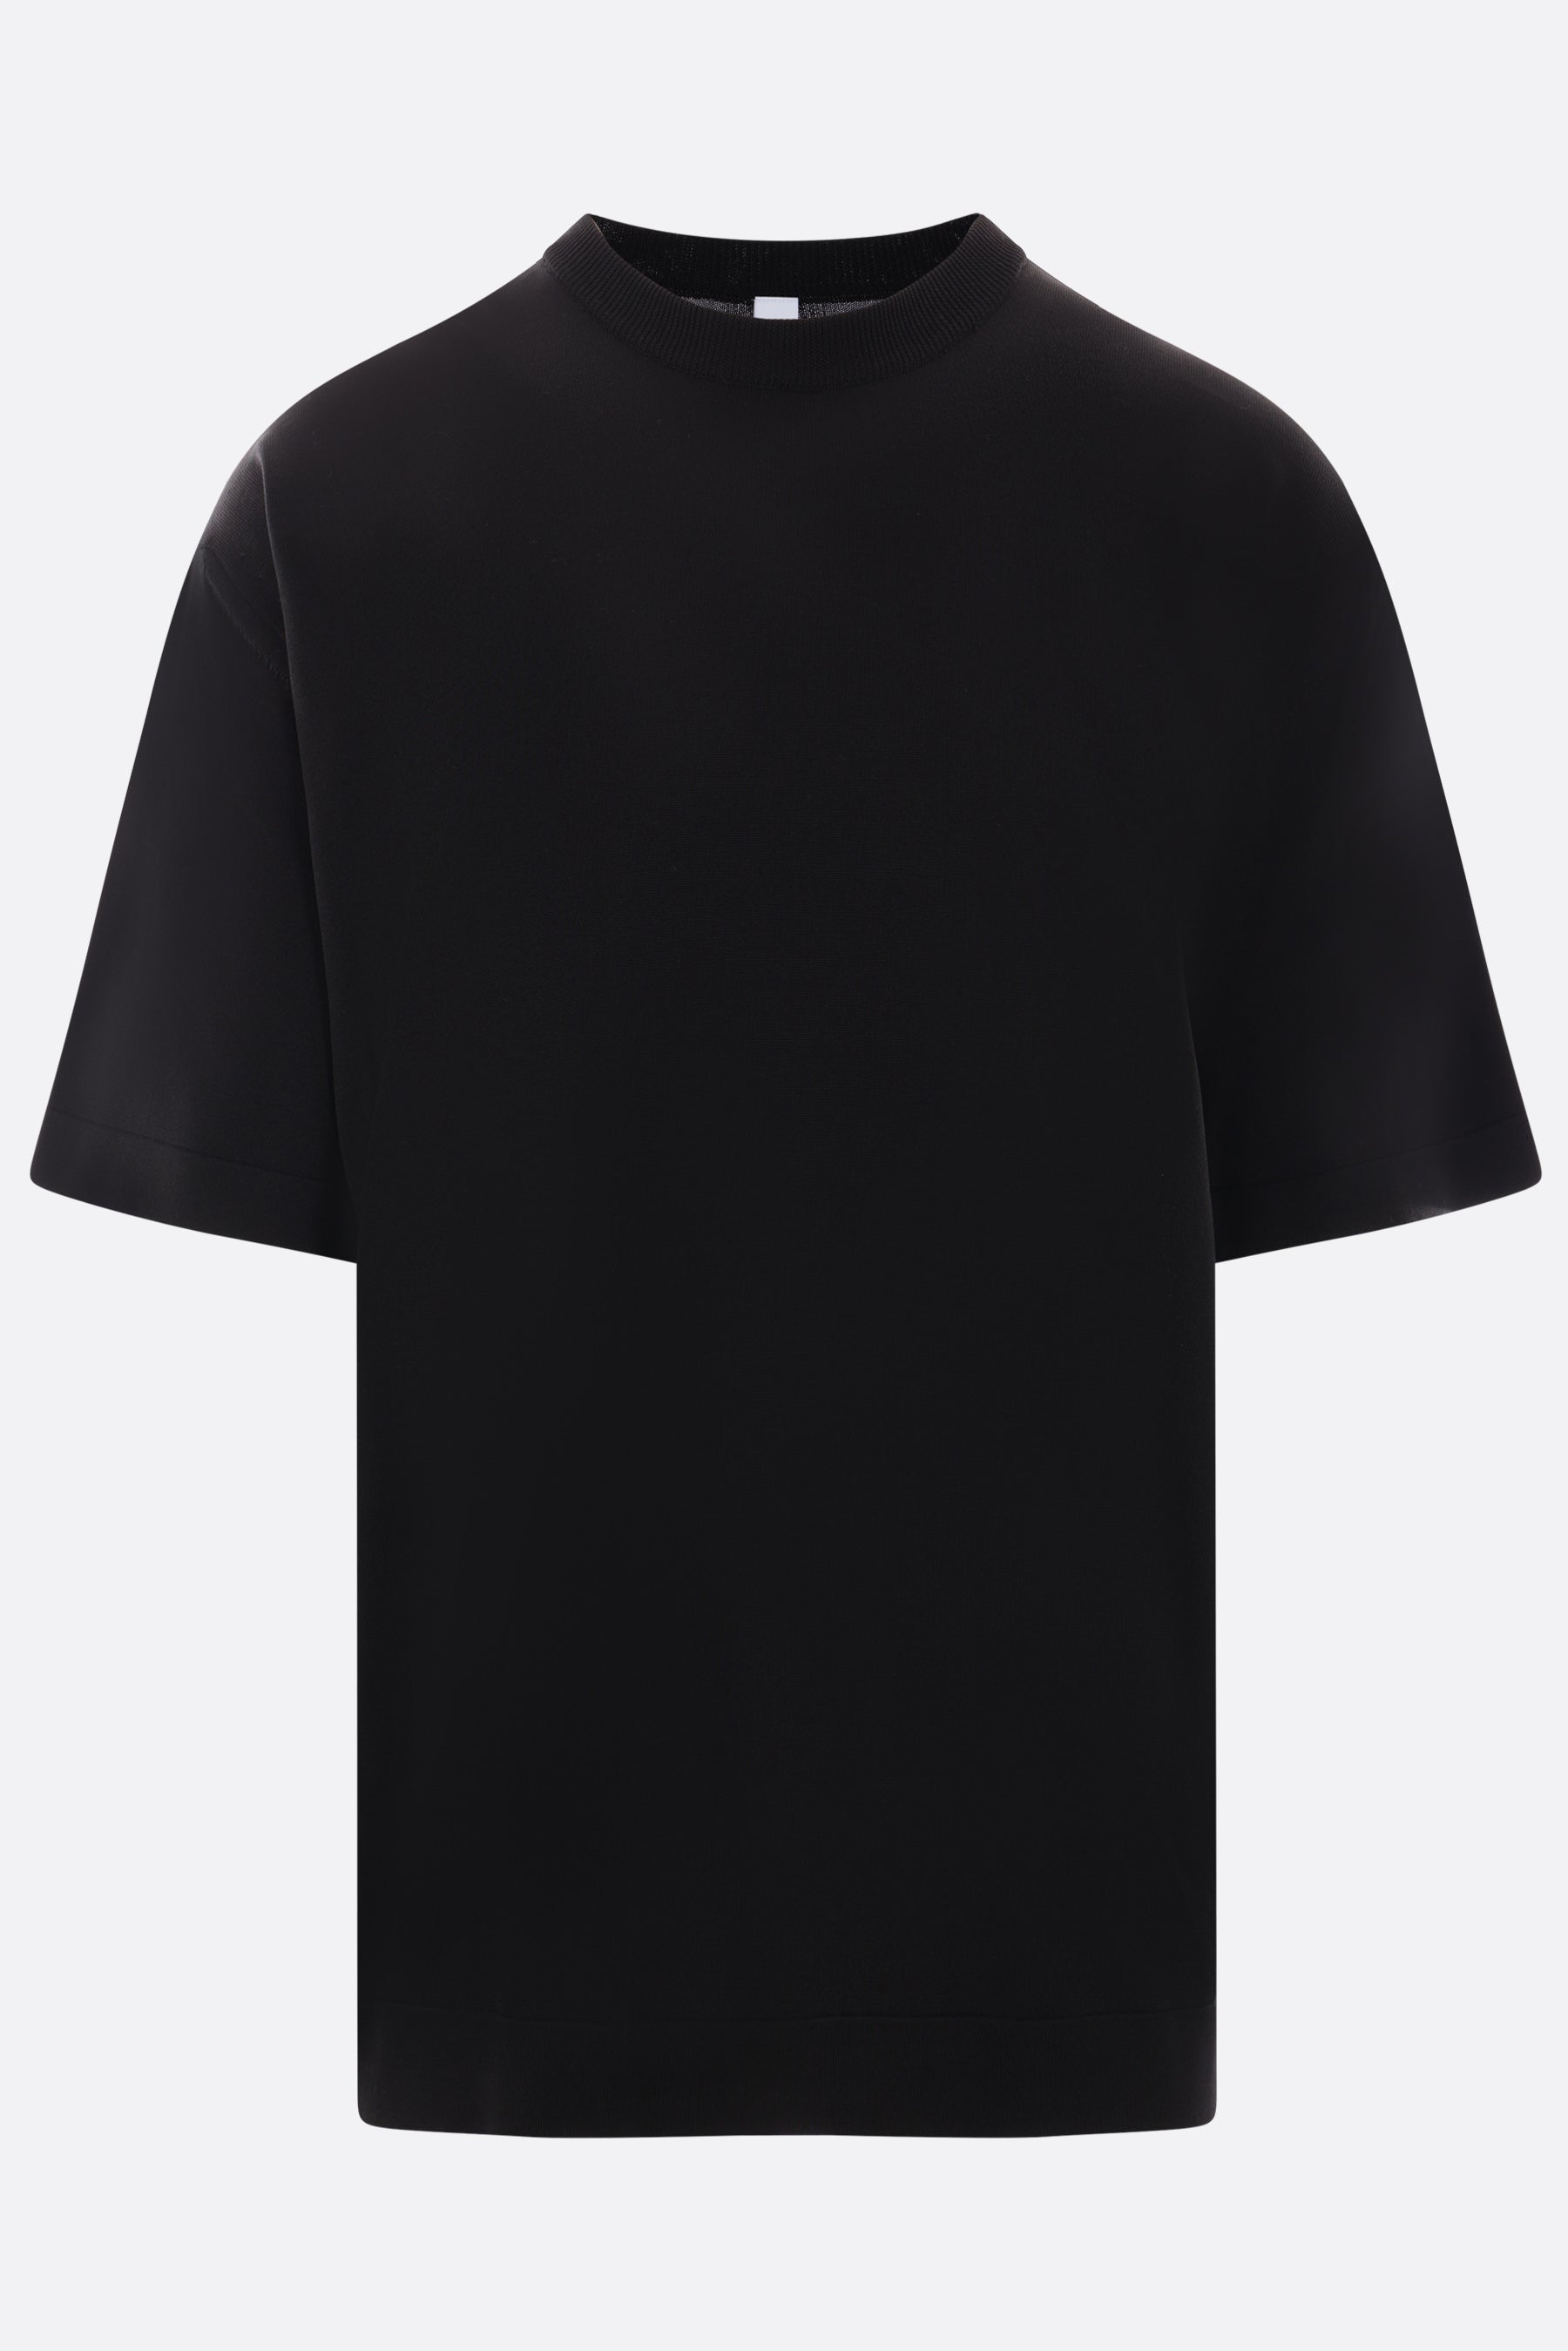 BS High Gauge t-shirt in ribbed technical fabric knit